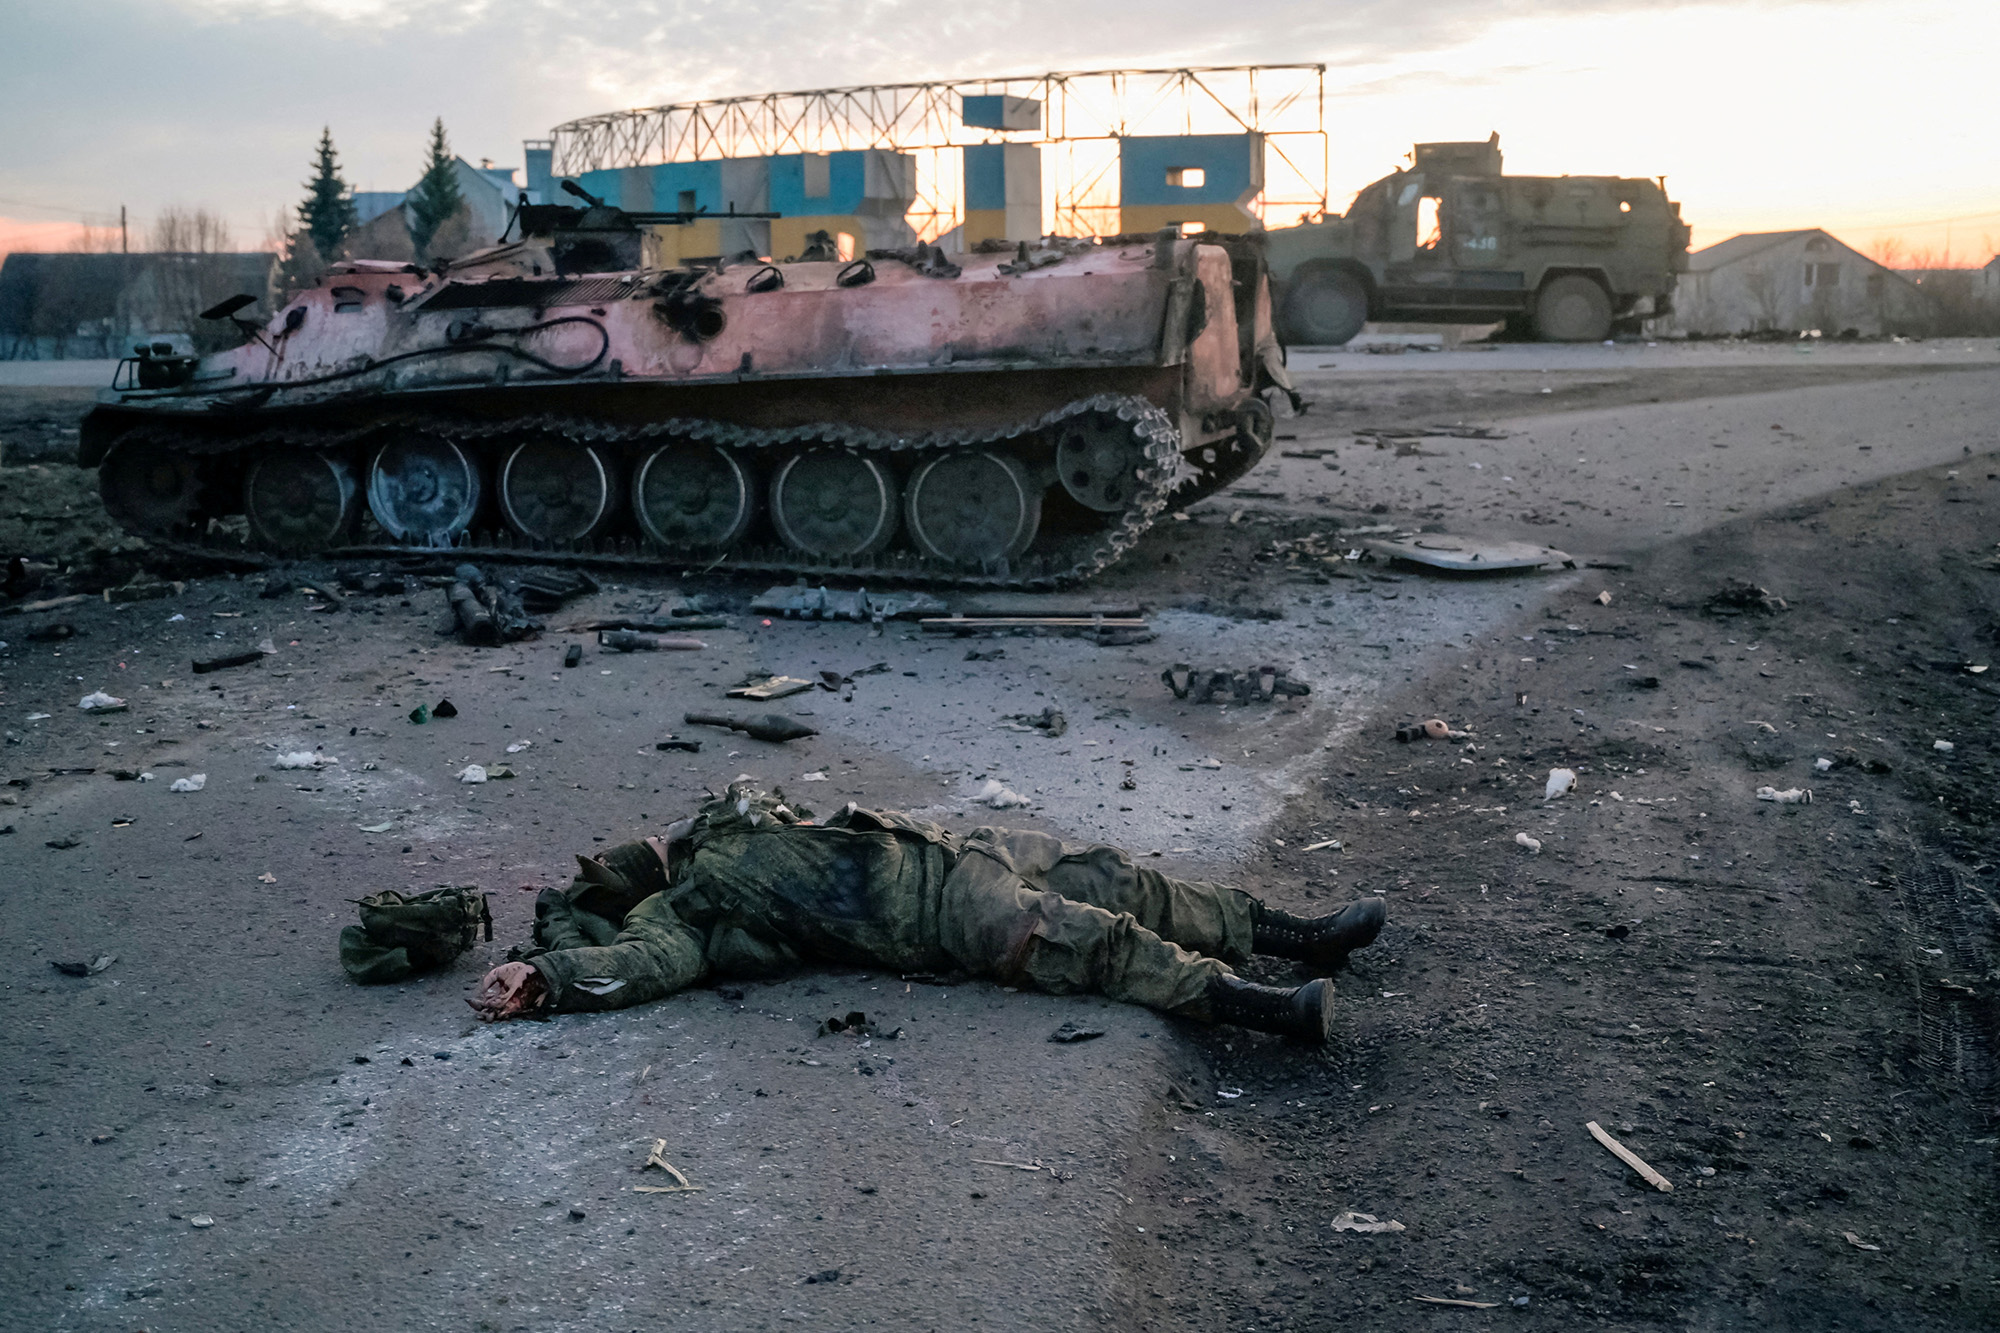 The body of a soldier, without insignia, who the Ukrainian military claim is a Russian army serviceman killed in fighting, lies on a road outside the city of Kharkiv